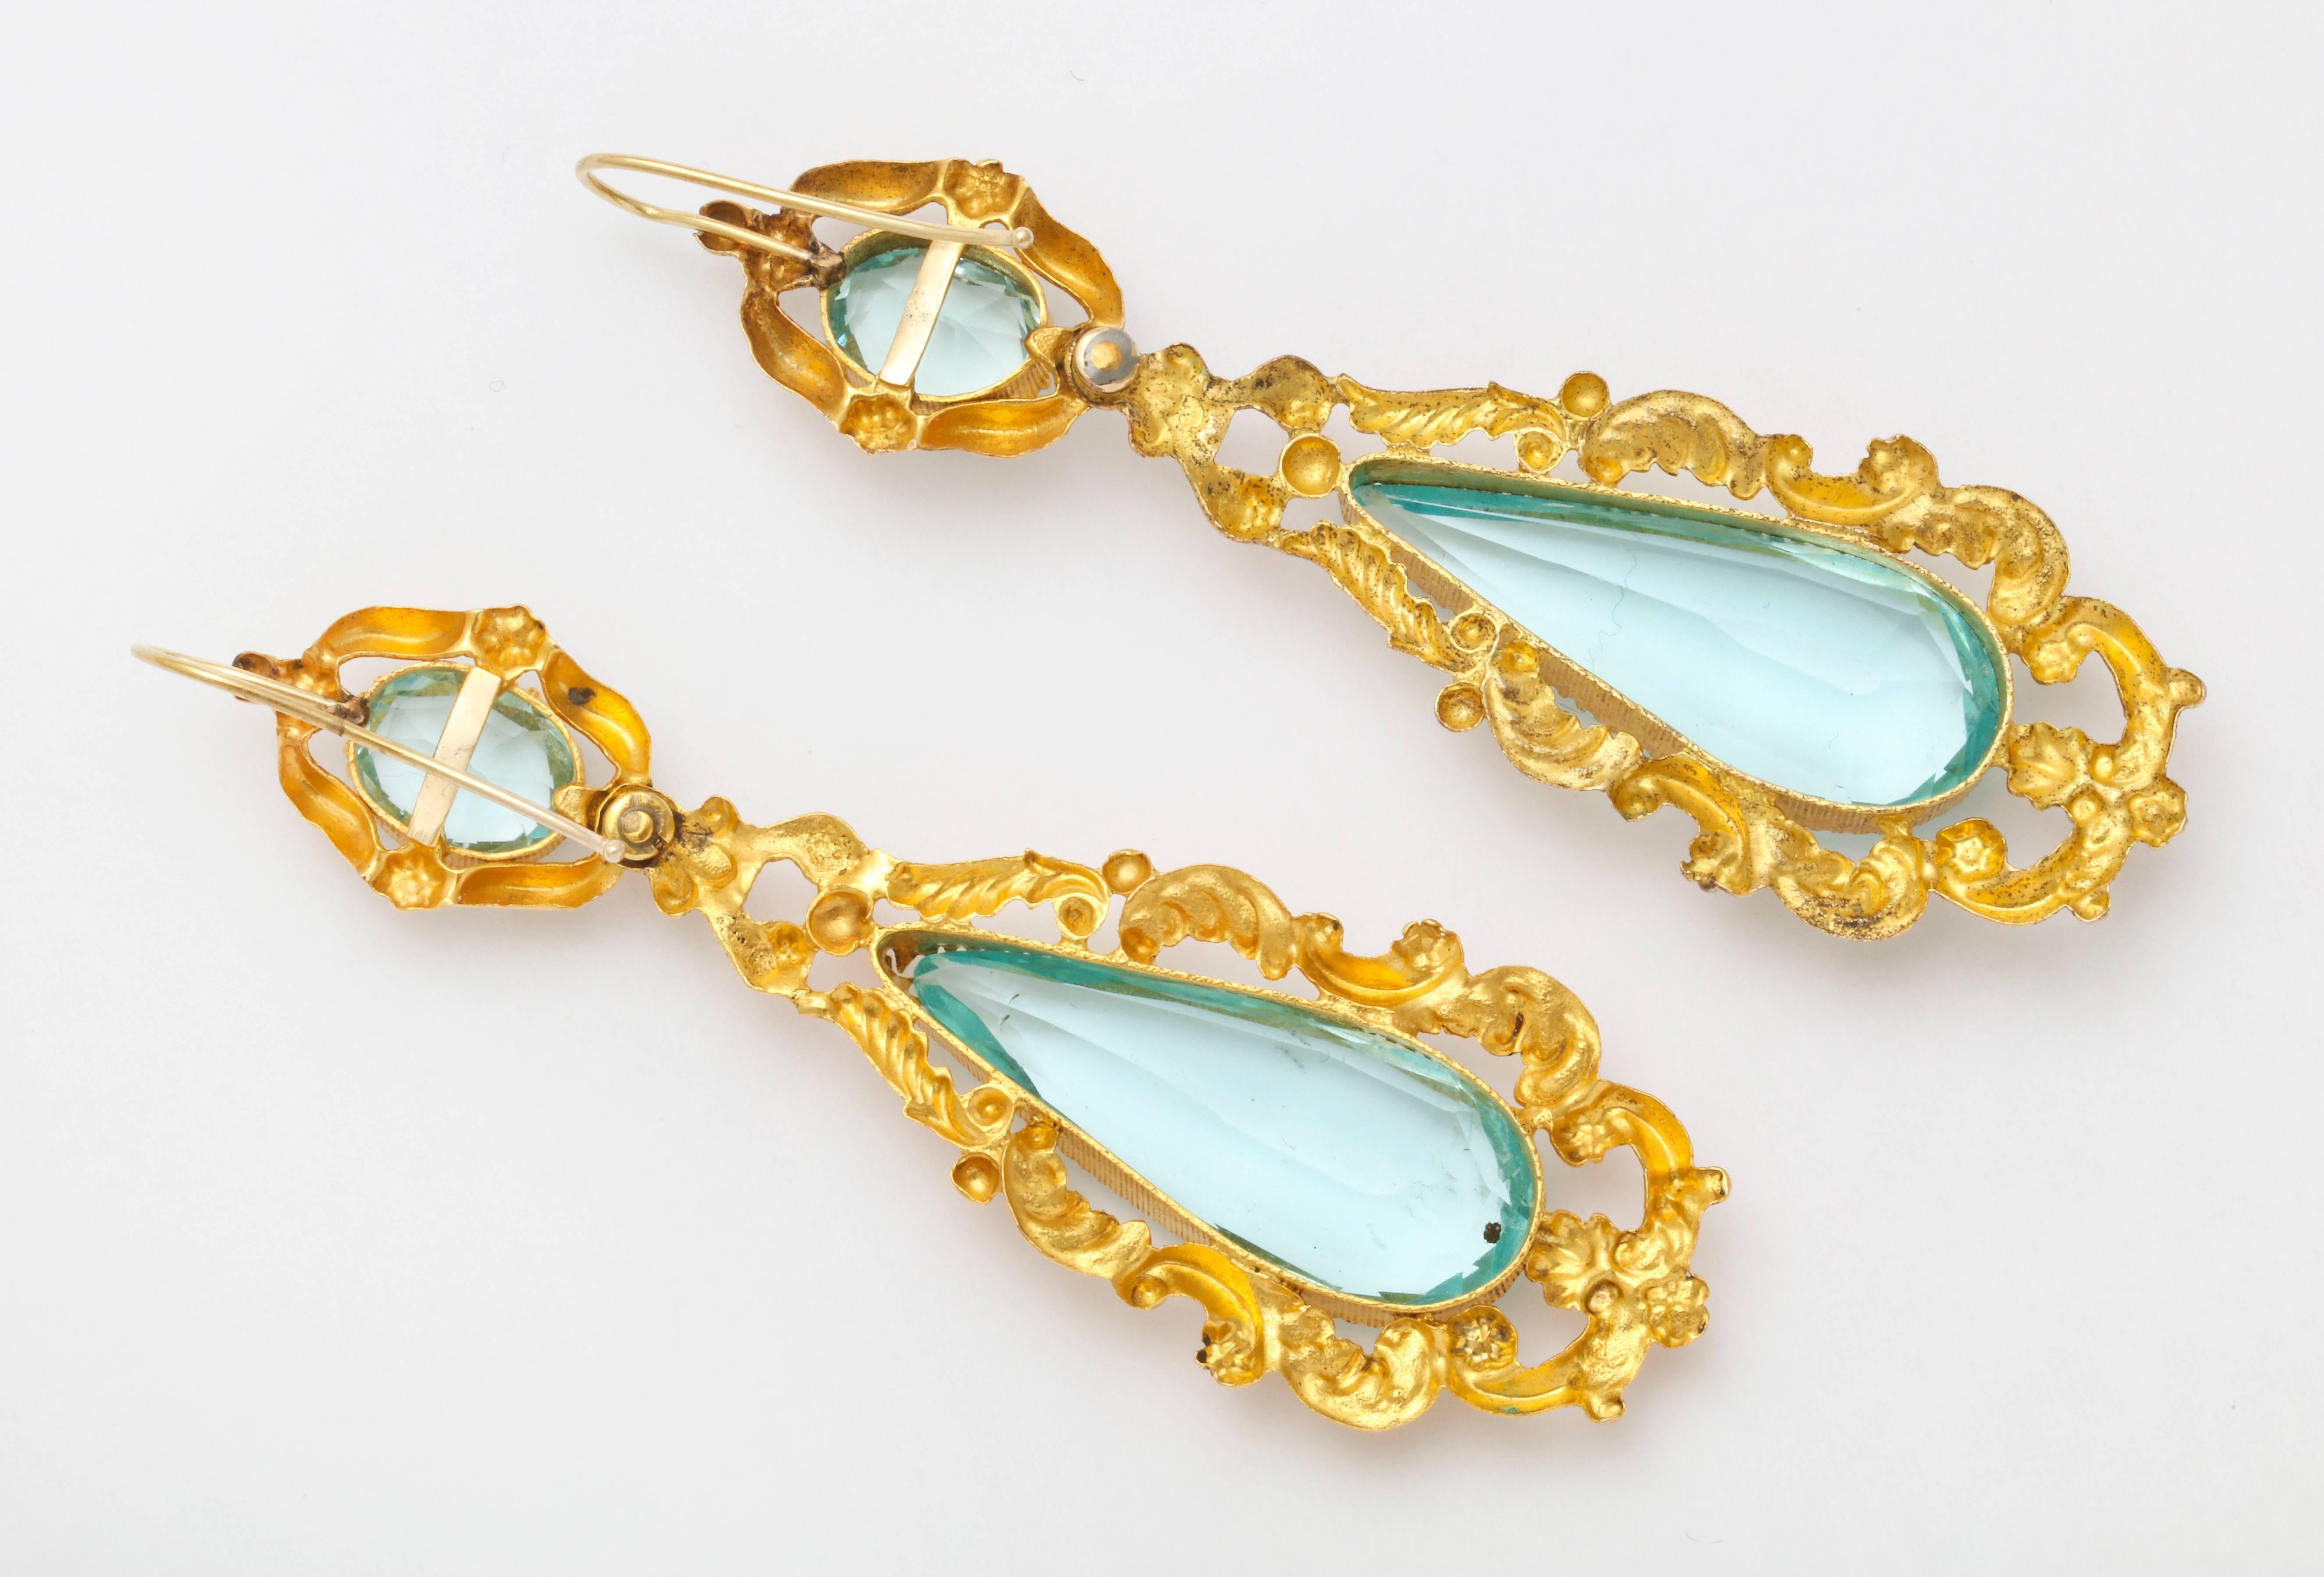 A luscious pair of lightweight chandelier earrings, straight from a 19th century history epic, are ablaze with clear, aquamarine teardrop paste stones surrounded by gold pinchbeck scrolls and vines engraved in repousse, In the early 1800's gold was